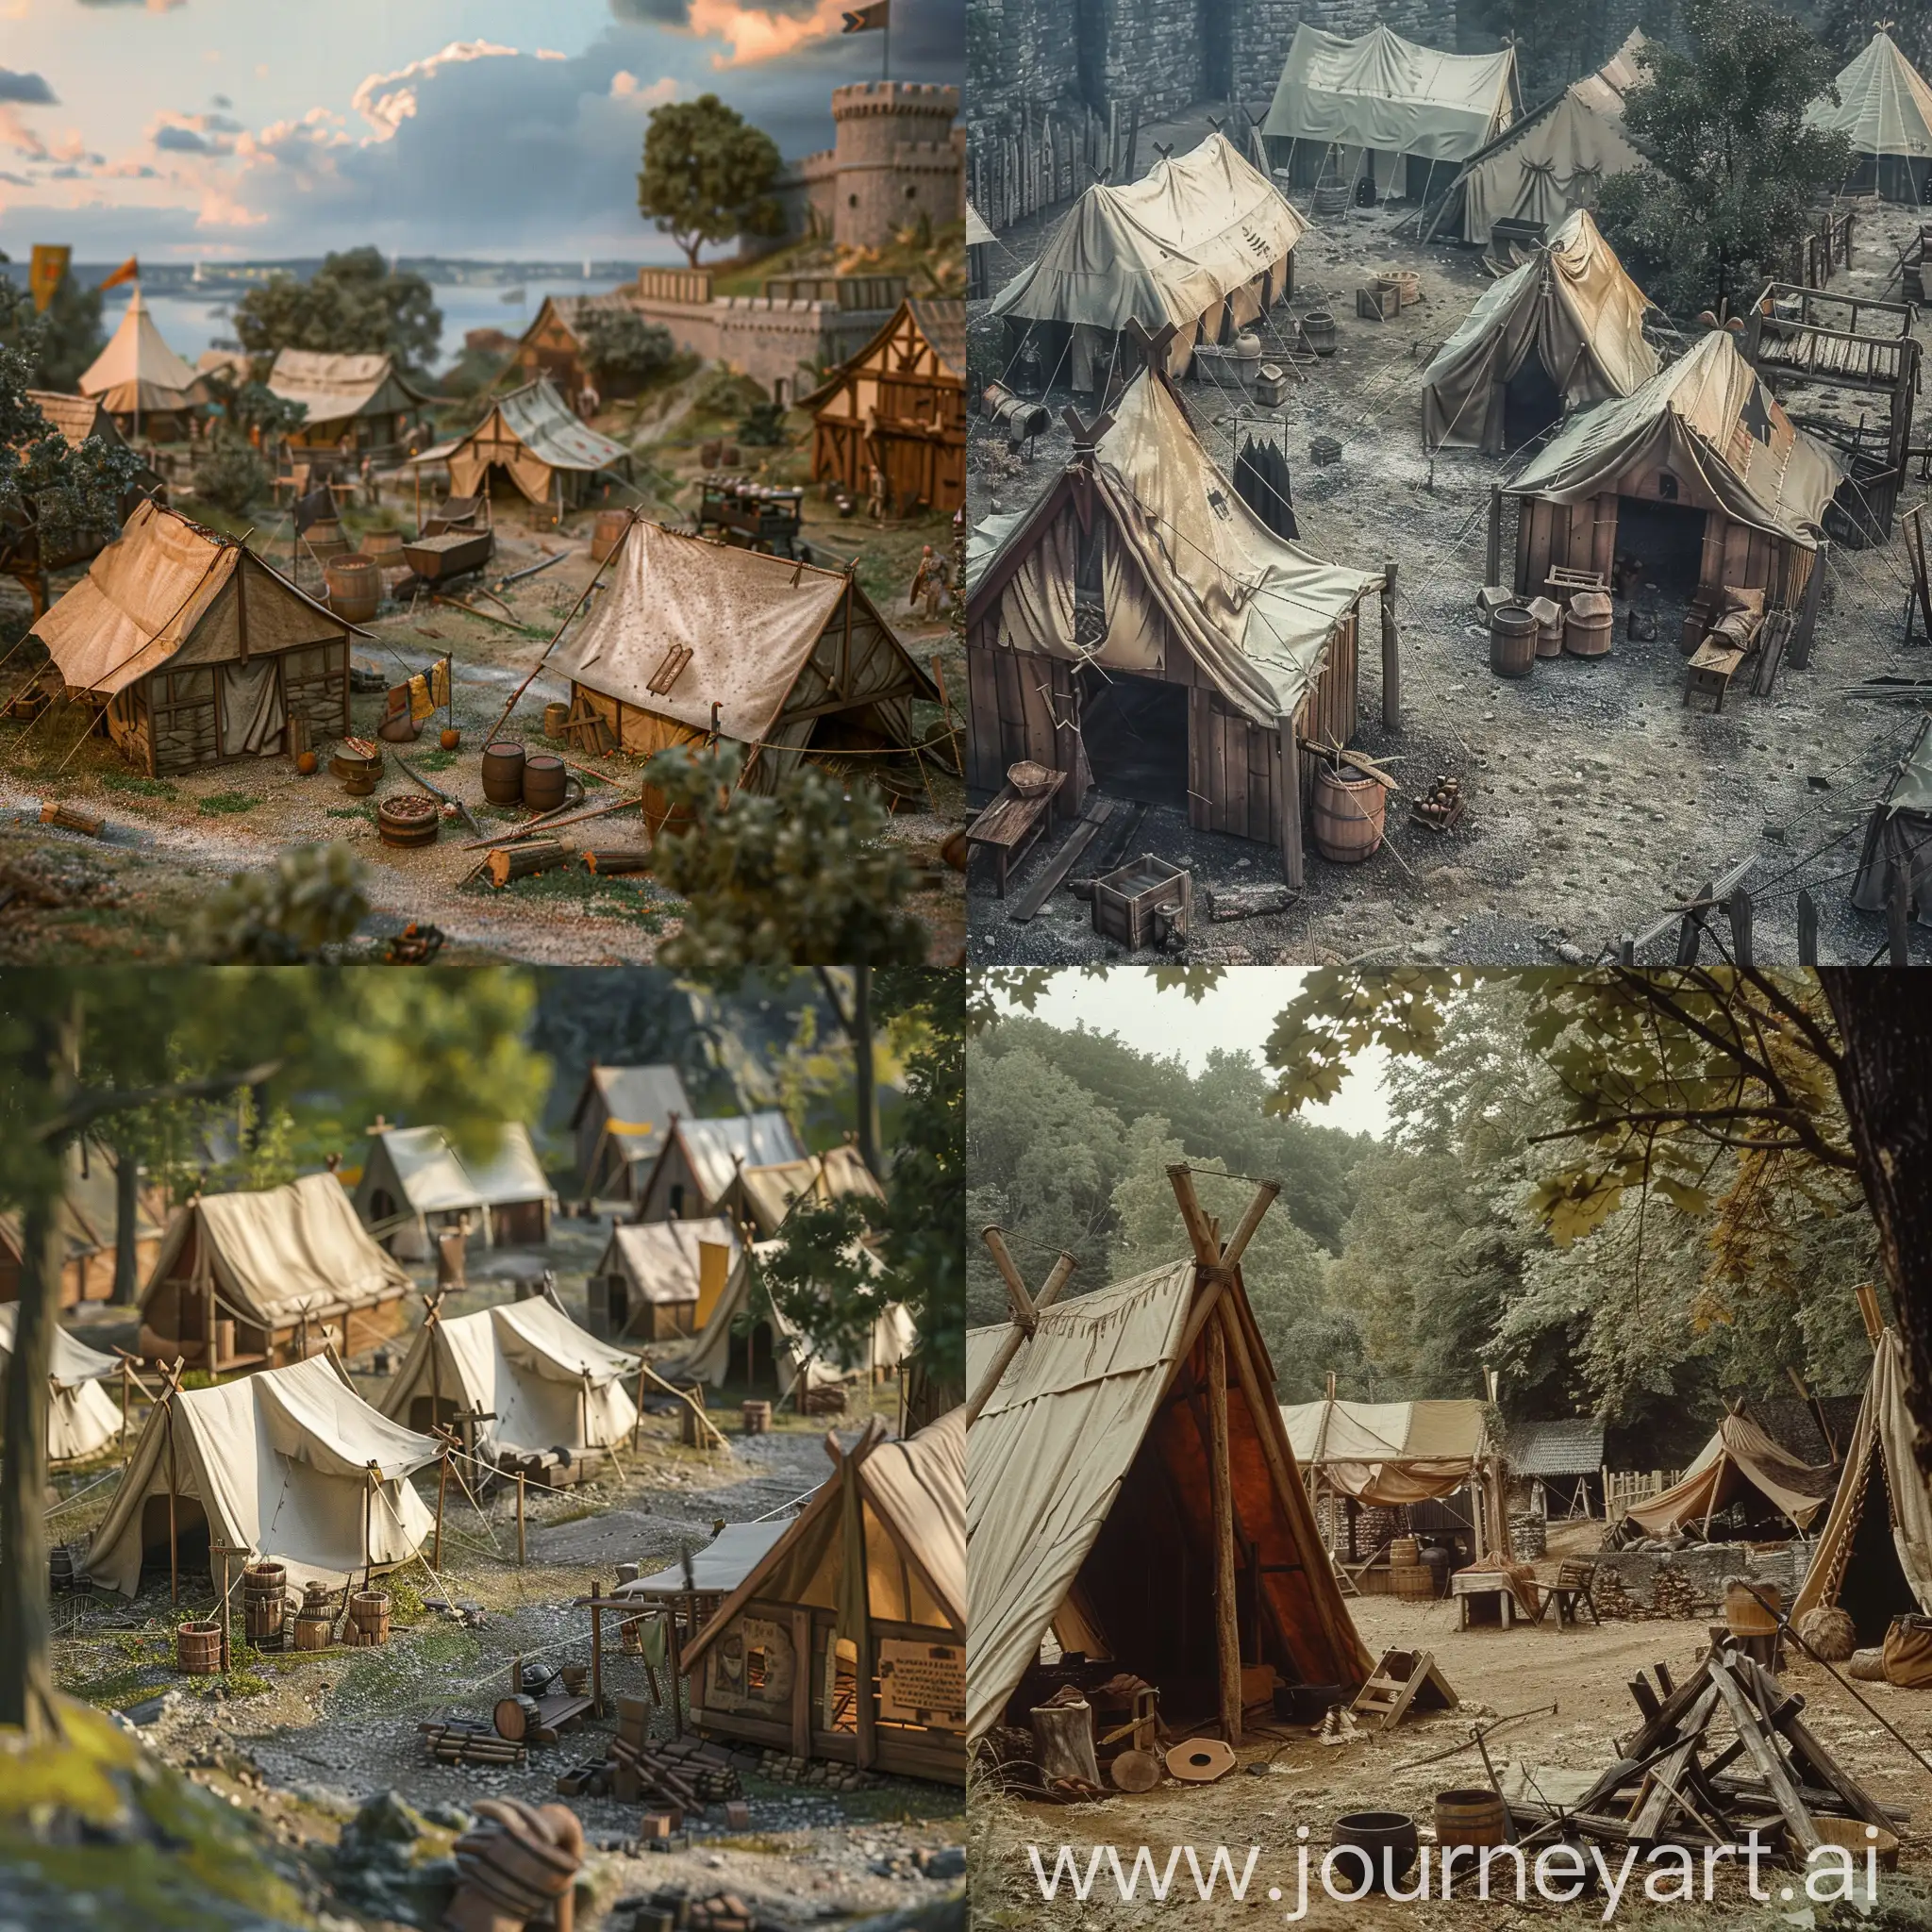 Medieval camp, tents and wood constructions, 14th century, very realistic